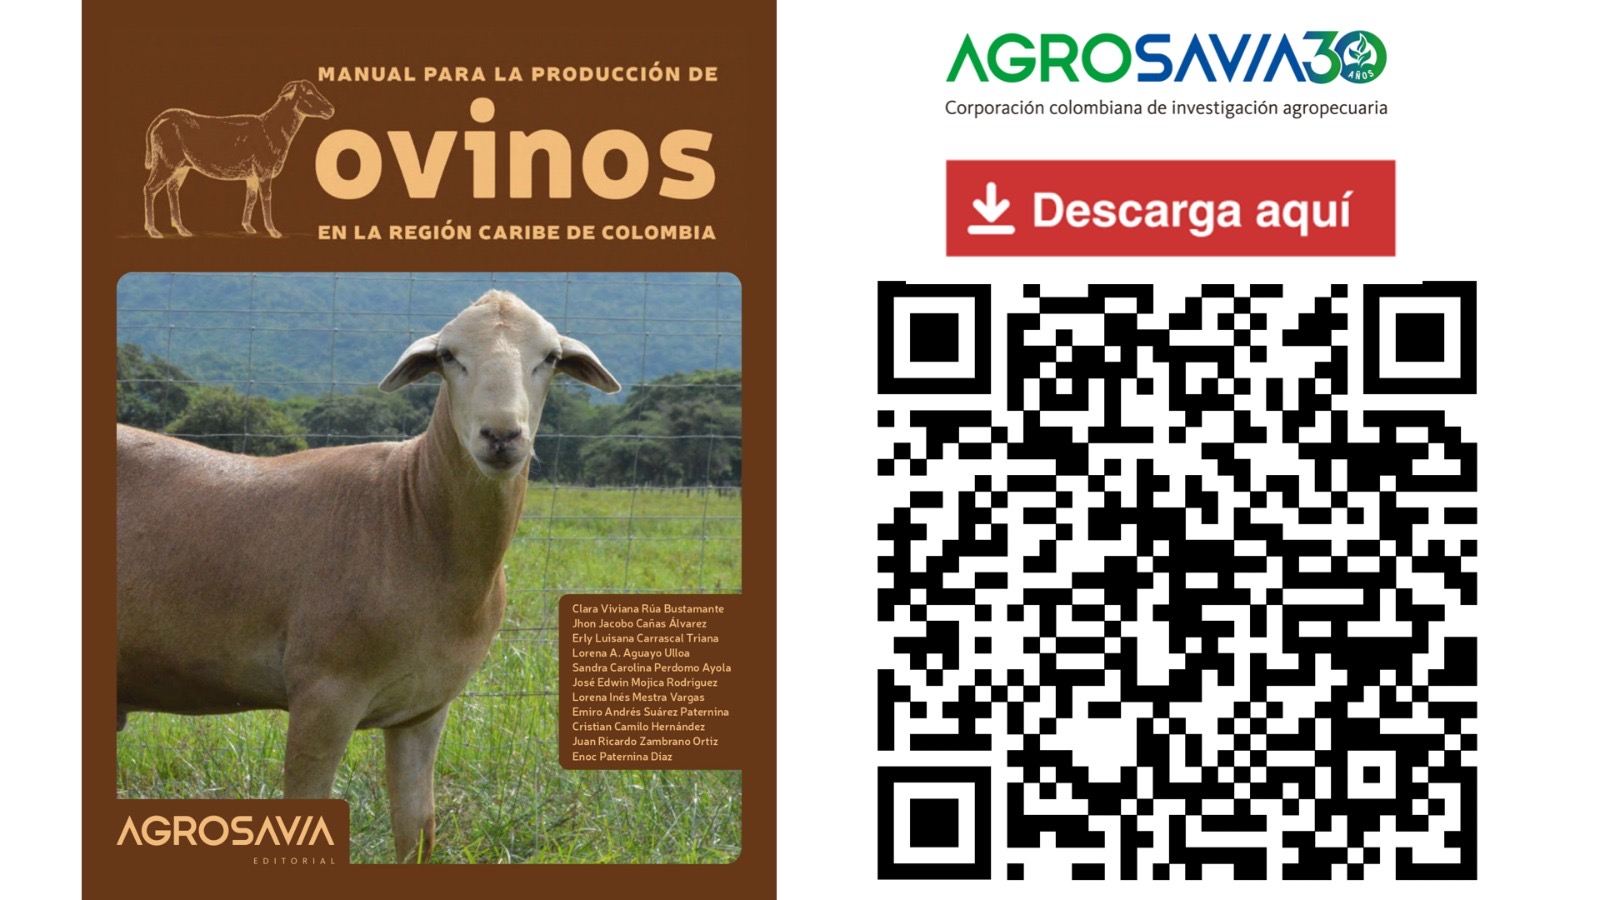 Technological recommendations for meat sheep production in the Caribbean